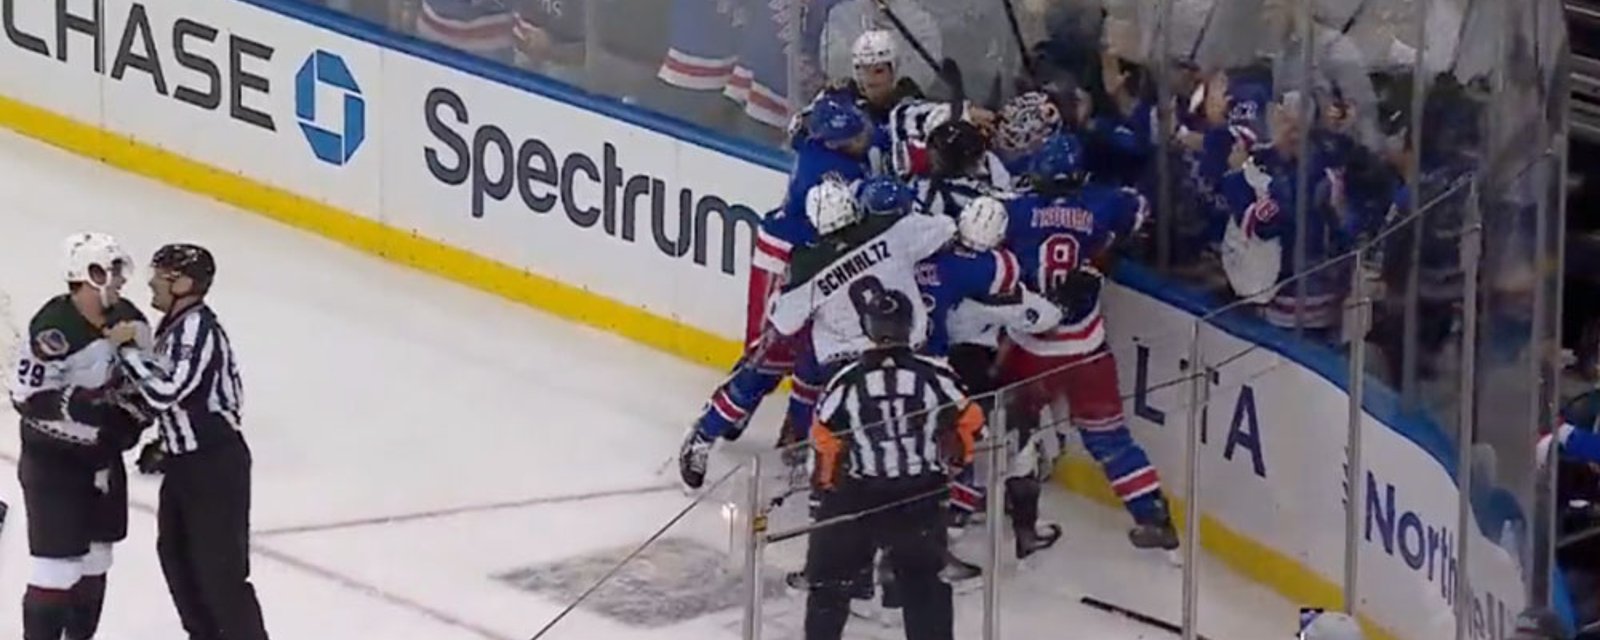 Refs struggle to break up brawl after Rangers' win over Coyotes last night